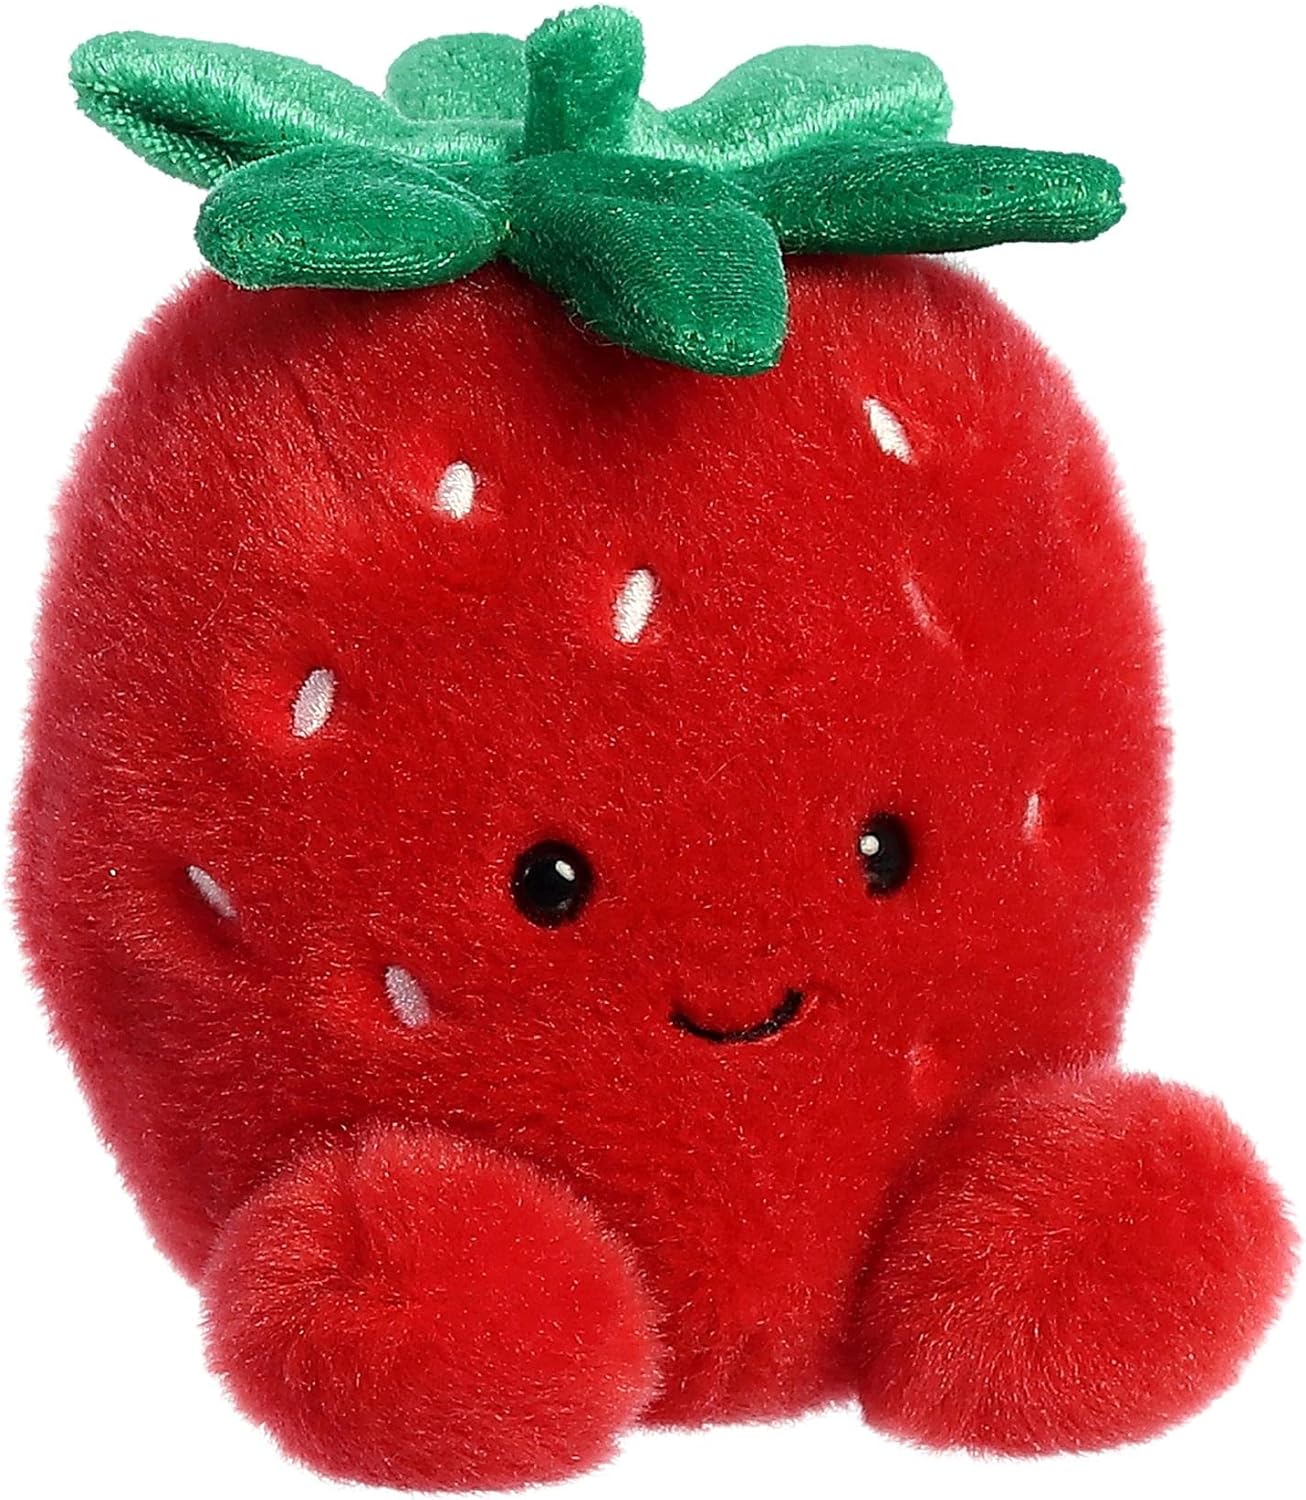 Palm Pals 5 Inches Juicy Strawberry